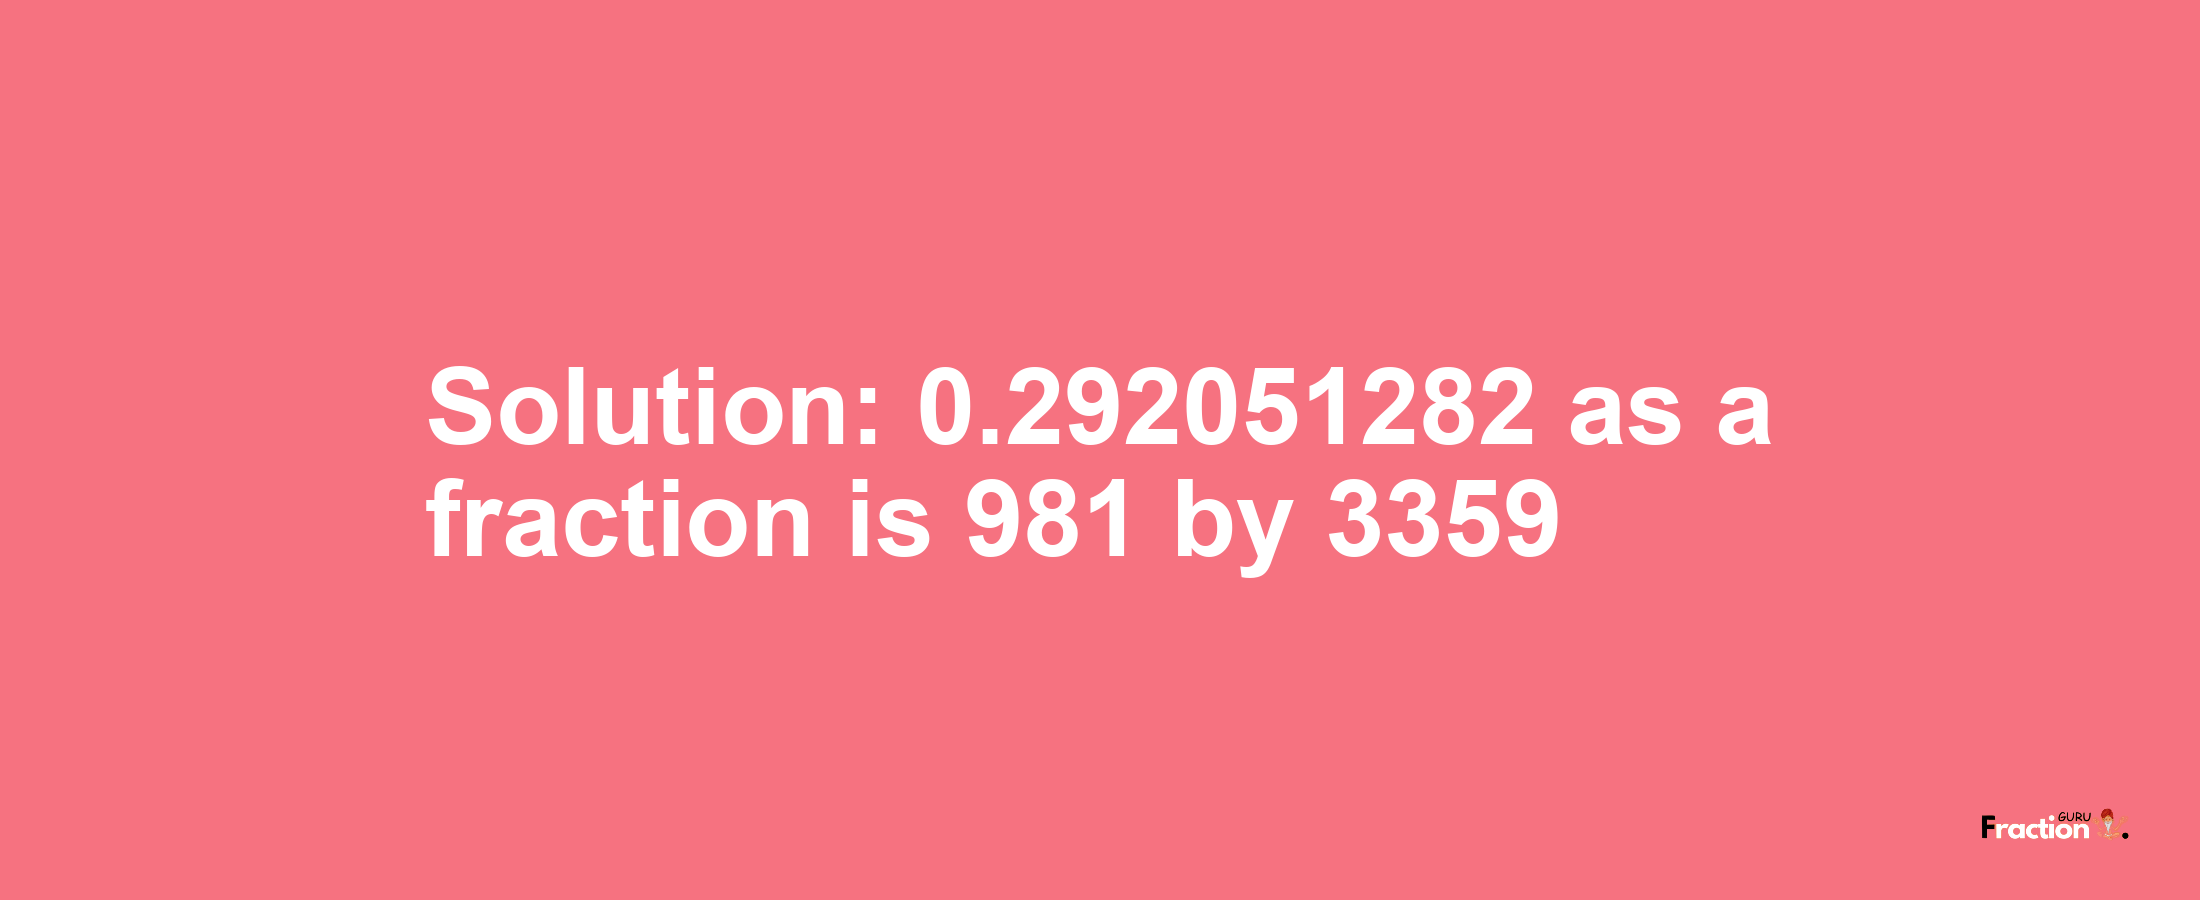 Solution:0.292051282 as a fraction is 981/3359